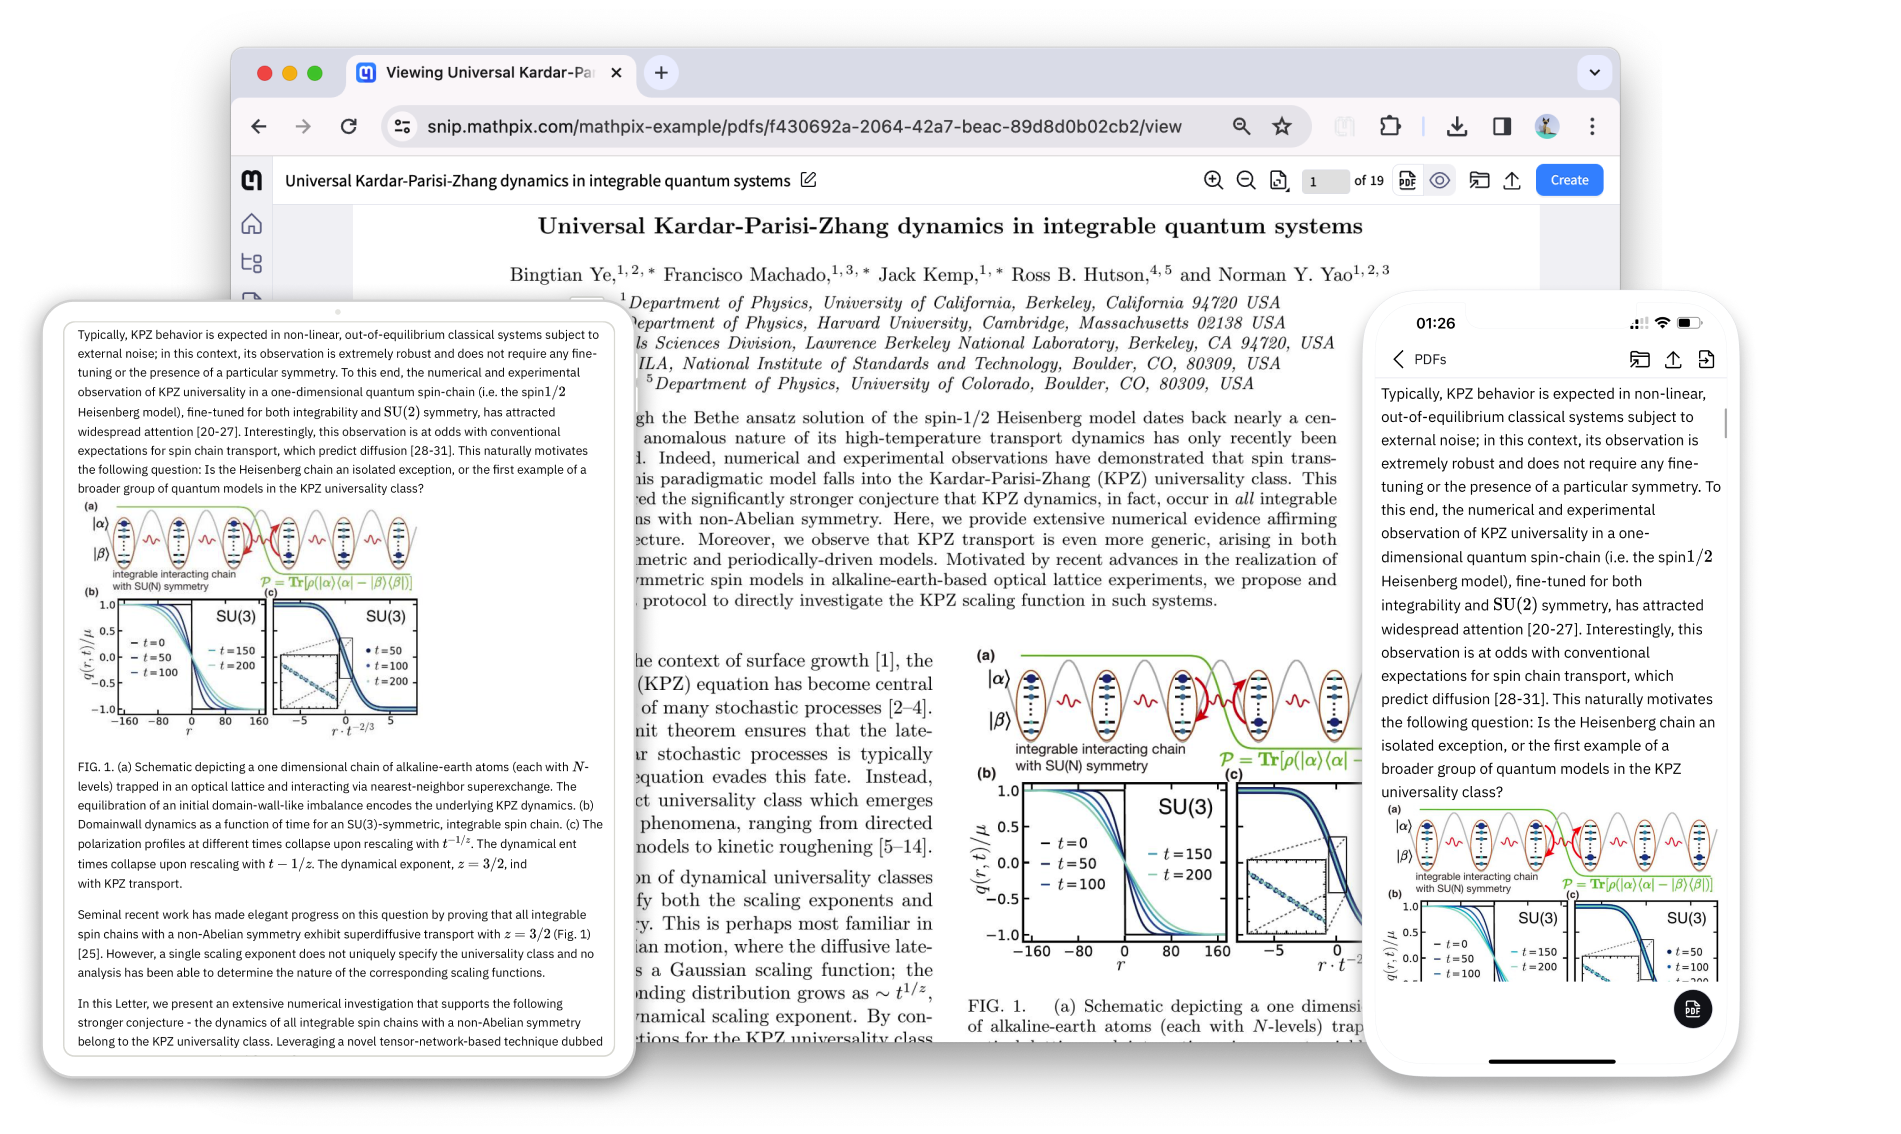 PDF reader on all devices